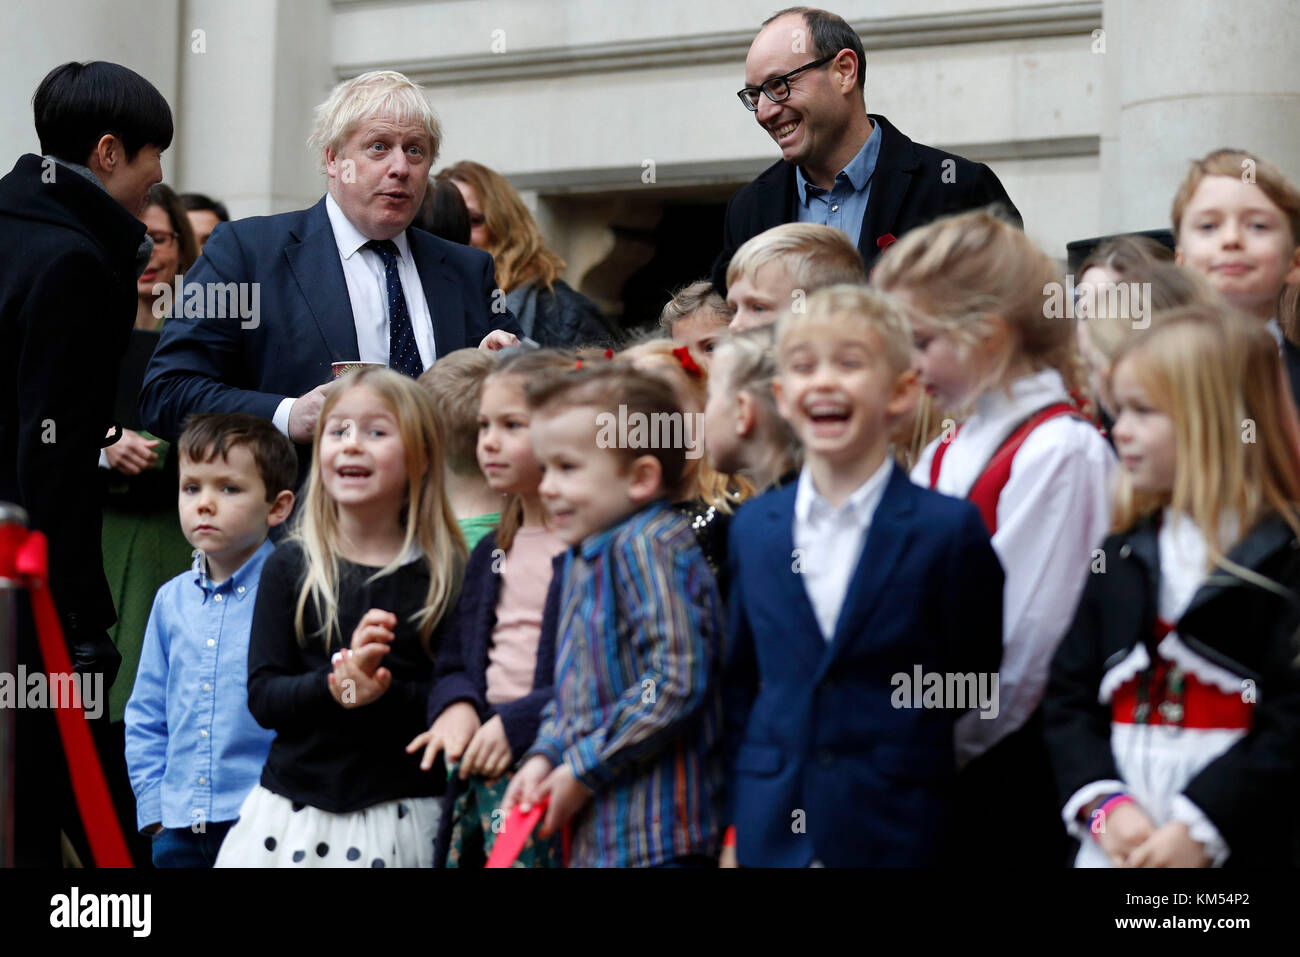 Foreign Secretary Boris Johnson reacts as he stands with with Norway's Foreign Secretary Ine Eriksen Soreide during the unveiling of a Christmas tree, gifted by Norway, outside The Foreign and Commonwealth Office (FCO) in London, after their bilateral talks. Stock Photo